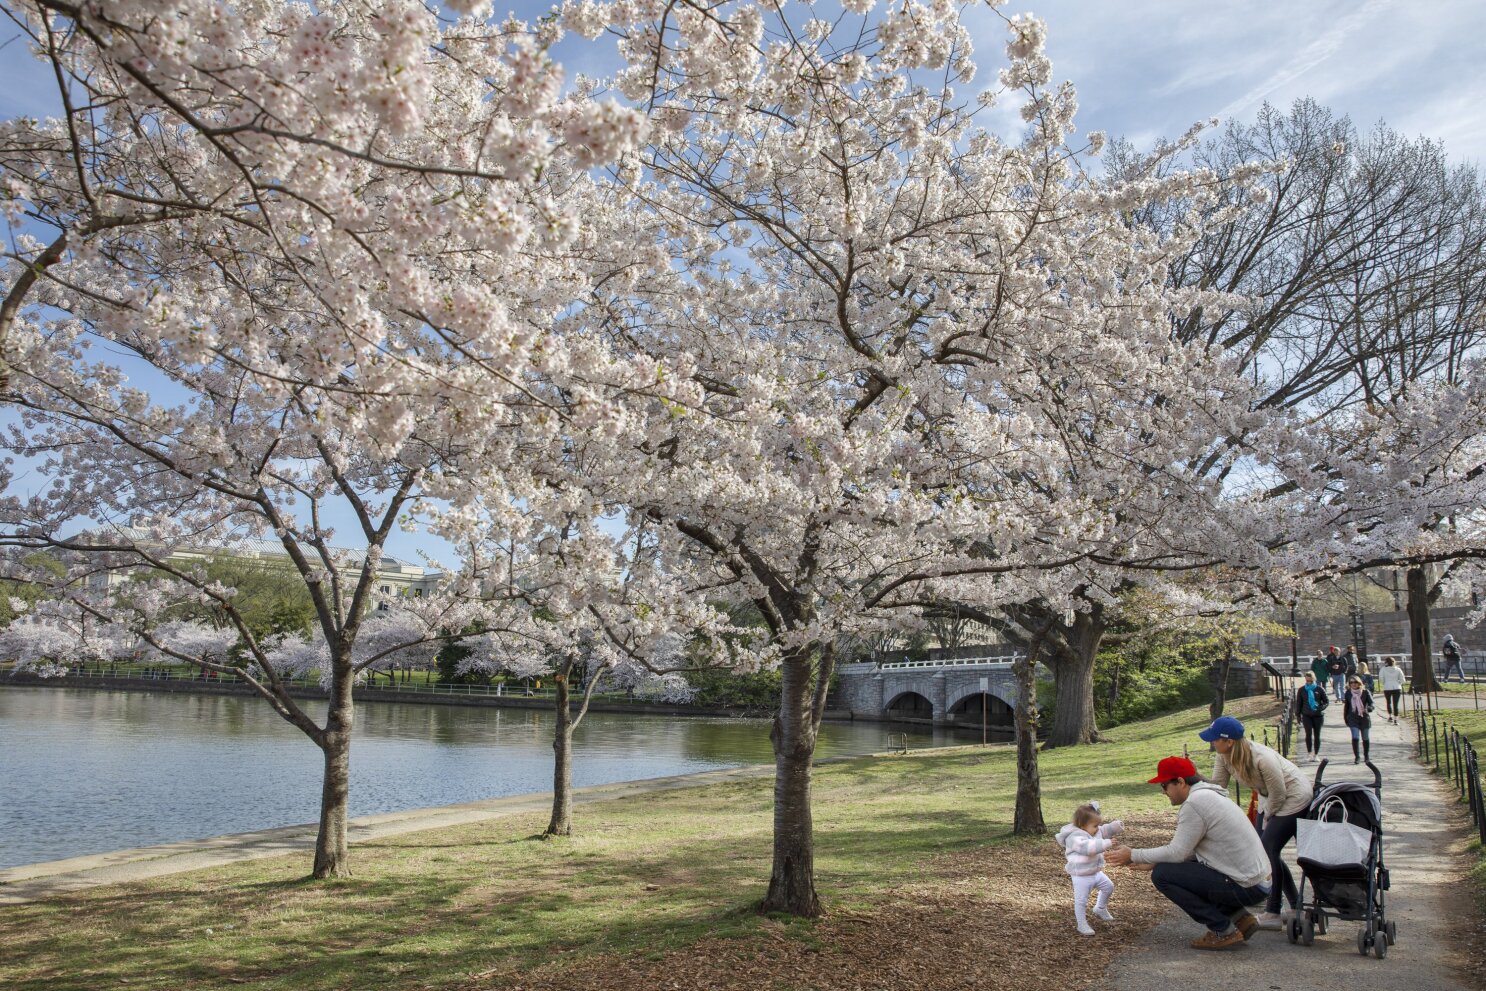 MLB - The D.C. Cherry Blossoms have arrived early this